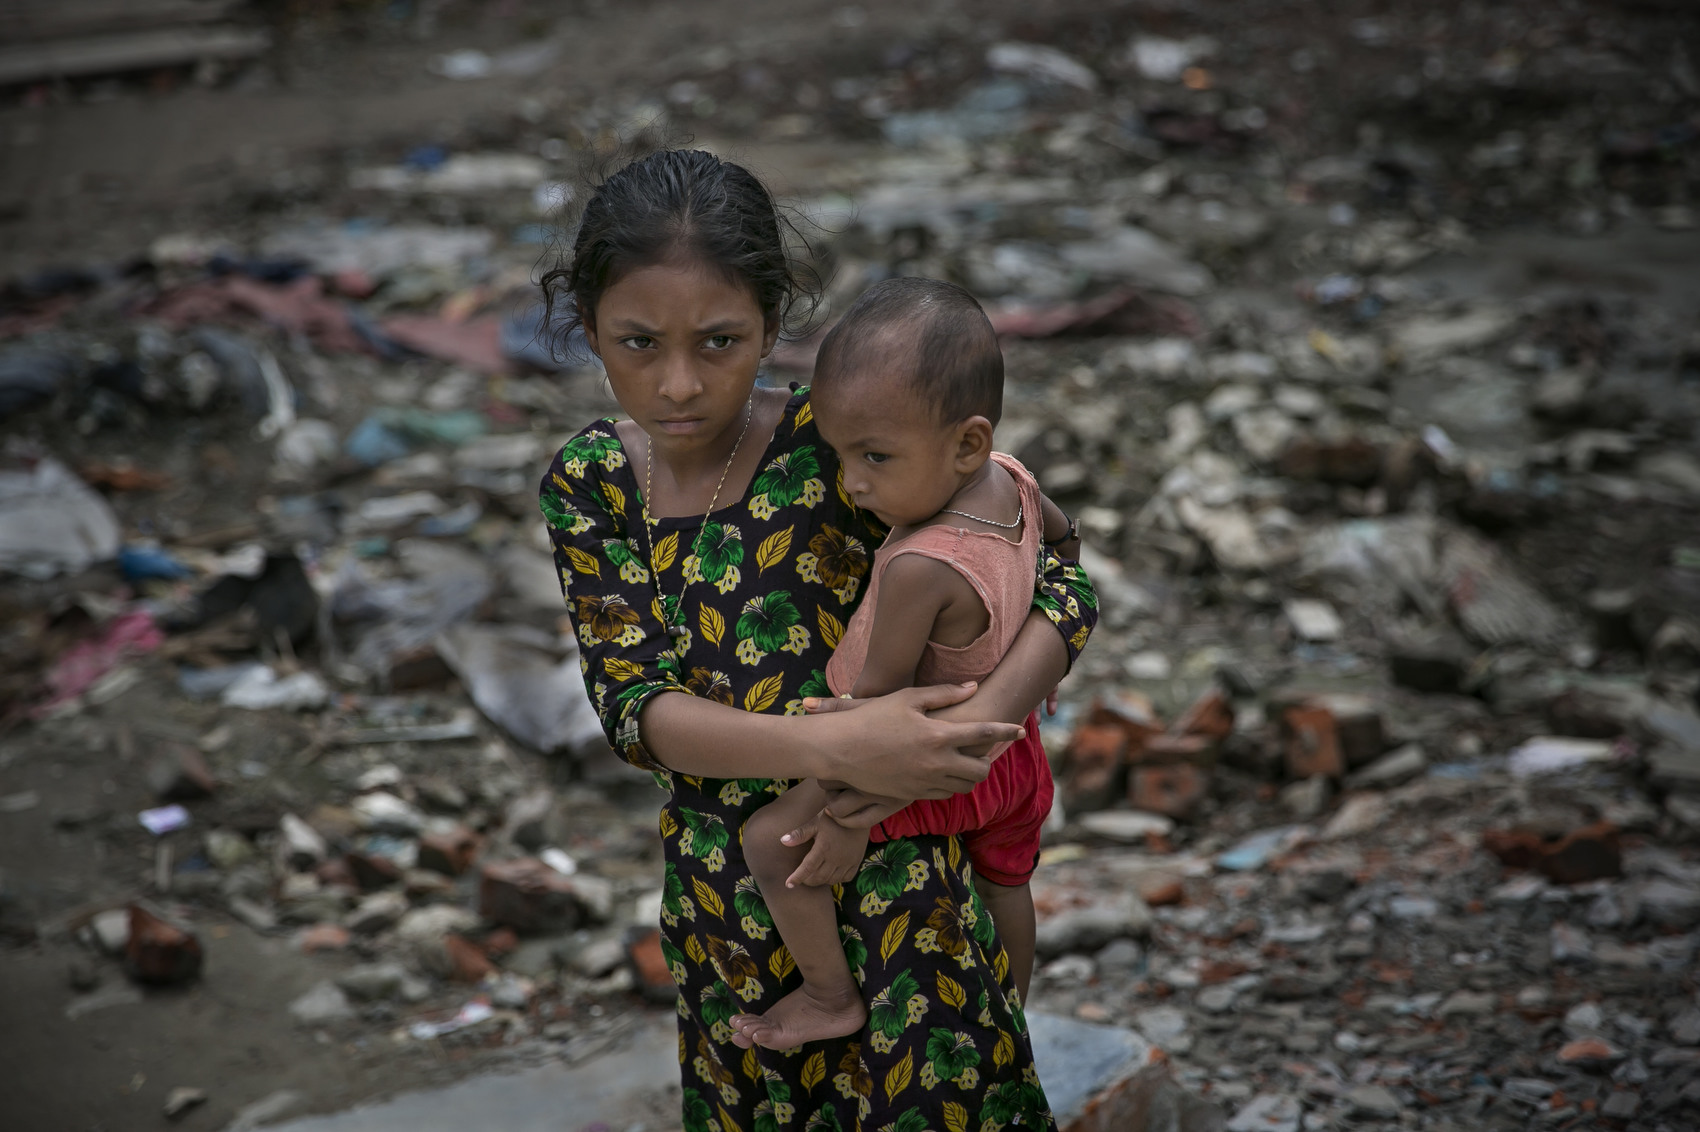 DHAKA, BANGLADESH - JUNE 10:  A girl holds a baby next to a polluted canal that leads to the Buriganga river in Shyampur June 10, 2018 in Dhaka, Bangladesh. Bangladesh has been reportedly ranked 10th out of the top 20 plastic polluter in the world with the Buriganga river known as one of the most polluted rivers in the country due to rampant dumping of industrial and human waste. Like many developing countries, Bangladesh lacks the infrastructure to effectively manage their waste which causes problems in keeping the waters safe for human and aquatic lives while dozens of tanneries on the banks of the river contribute industrial waste into the ground water. As June 5 was marked by the United Nations as World Environment Day, Buriganga symbolizes the general state of many rivers in Bangladesh, with the growing levels of pollutants and plastic waste consuming up all oxygen in the river and affecting our seafood while fishes consume bits of plastic which mimics their natural food sources and eventually lands on our dinner table. (Photo by Allison Joyce/Getty Images)